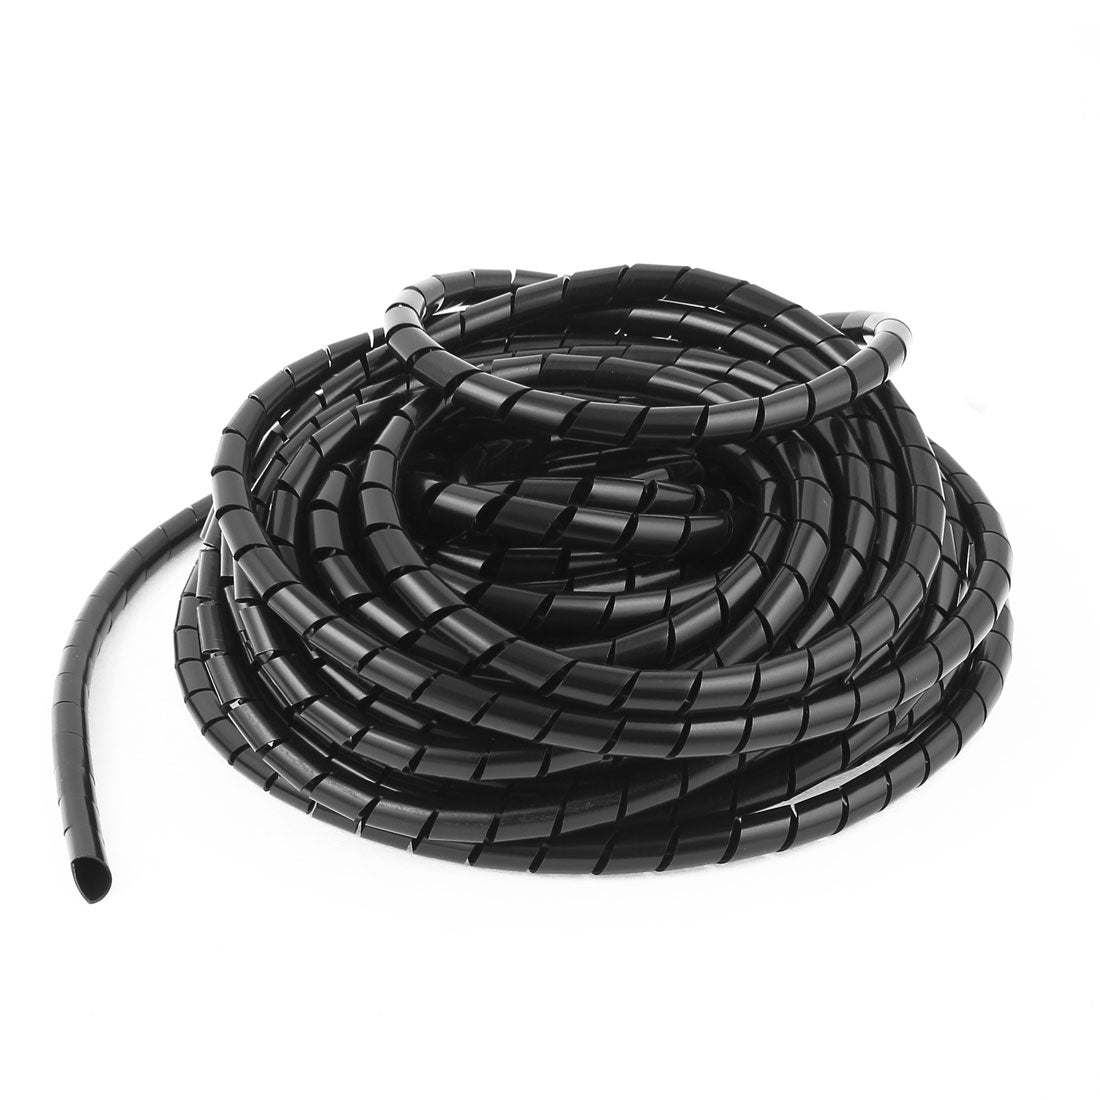 uxcell Uxcell Spiral Tube Cable Wire Wrap Organizer Computer Cord Management 8mmx14m Black